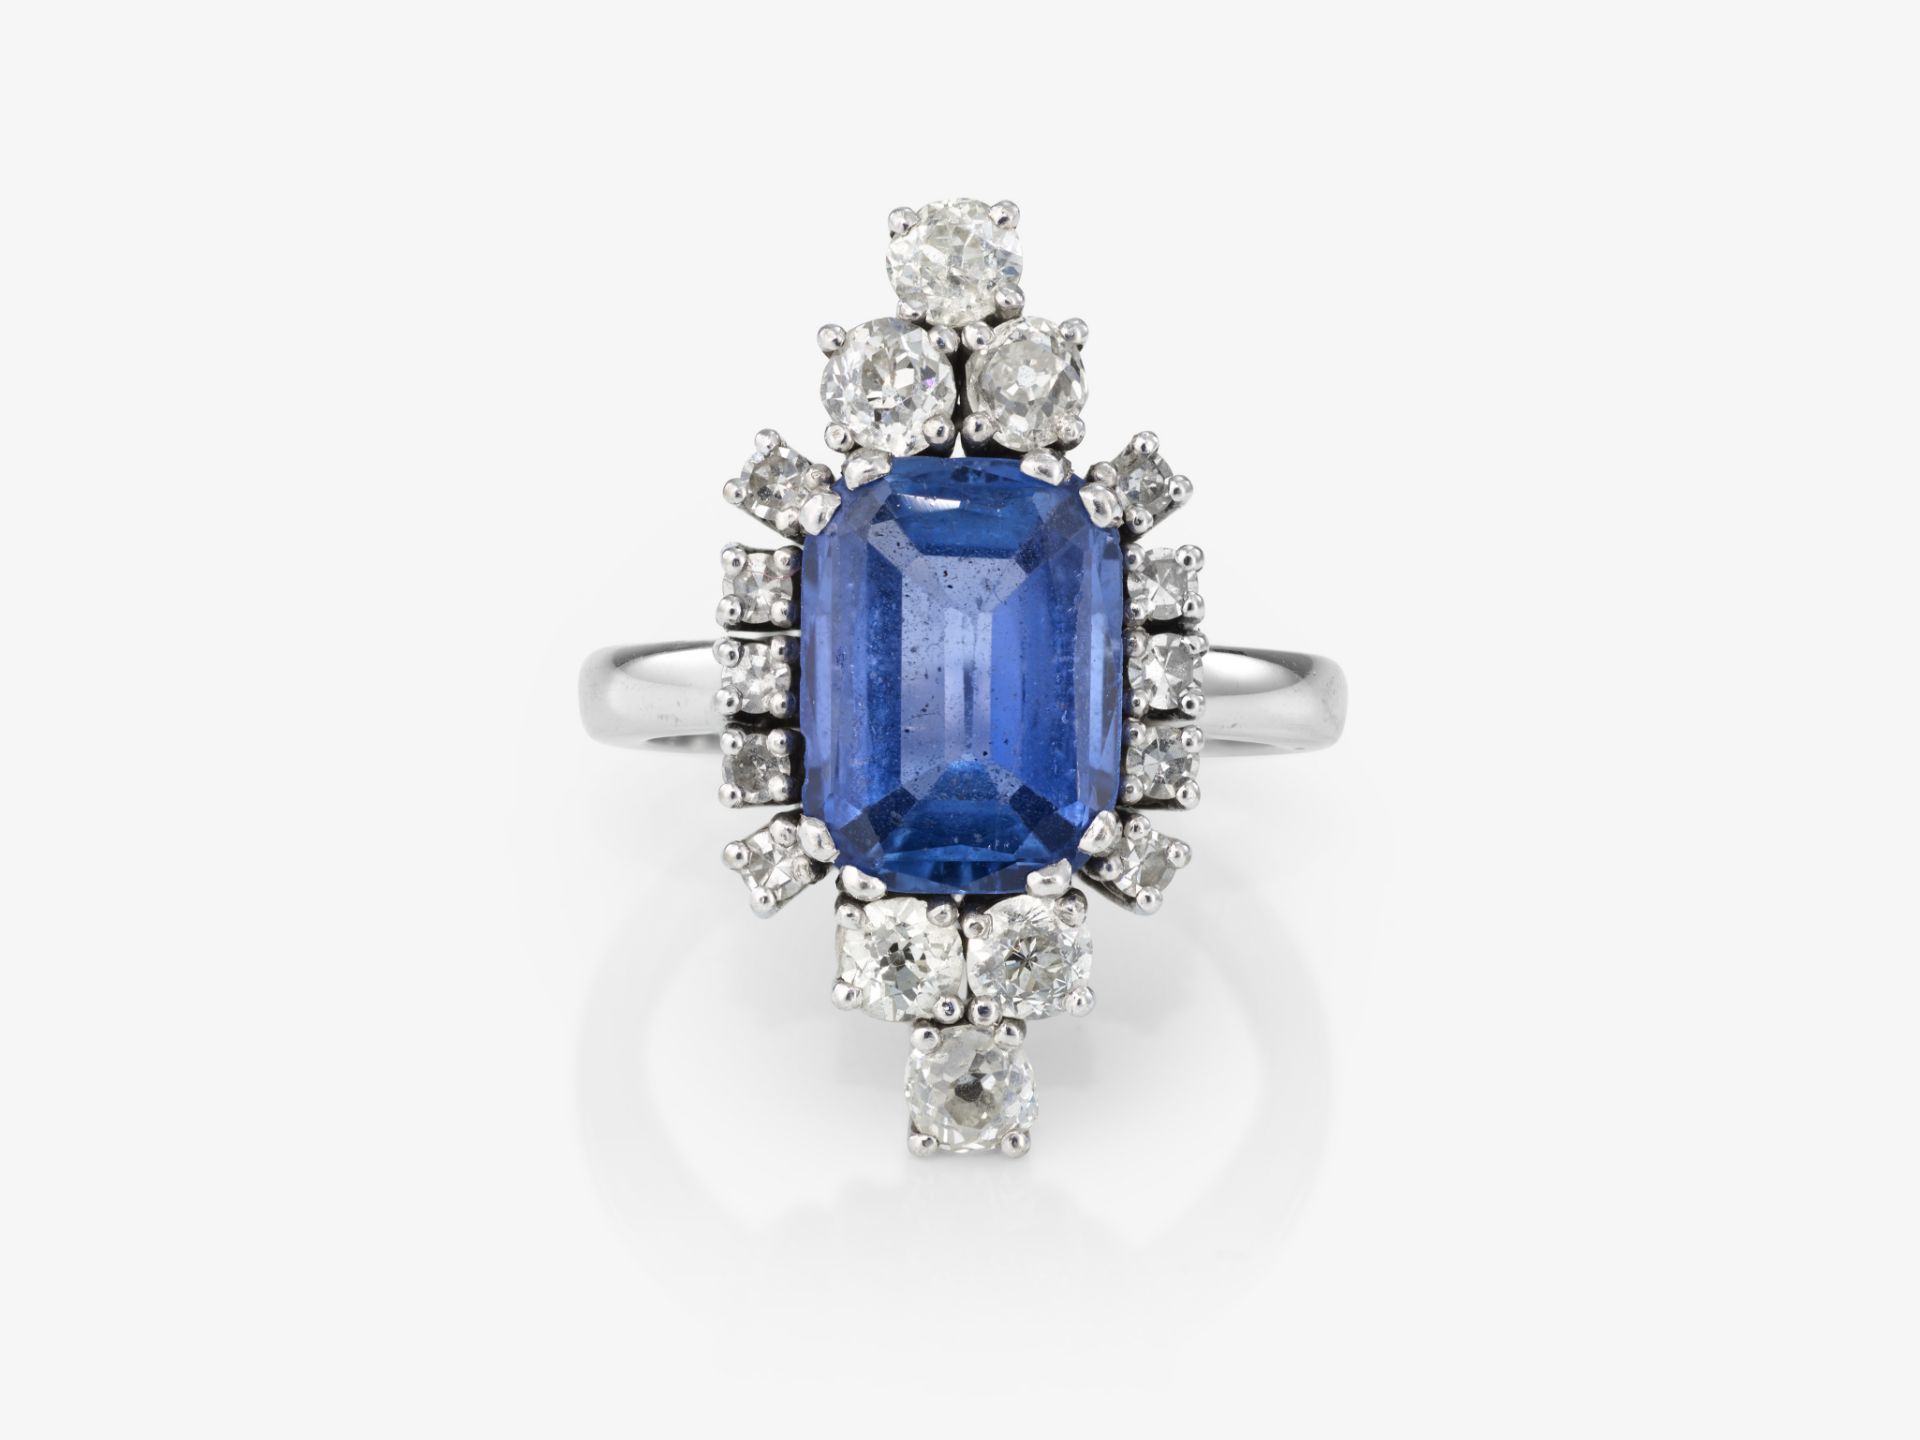 A ring with a sapphire and diamonds - Germany, 1970s - Image 2 of 2